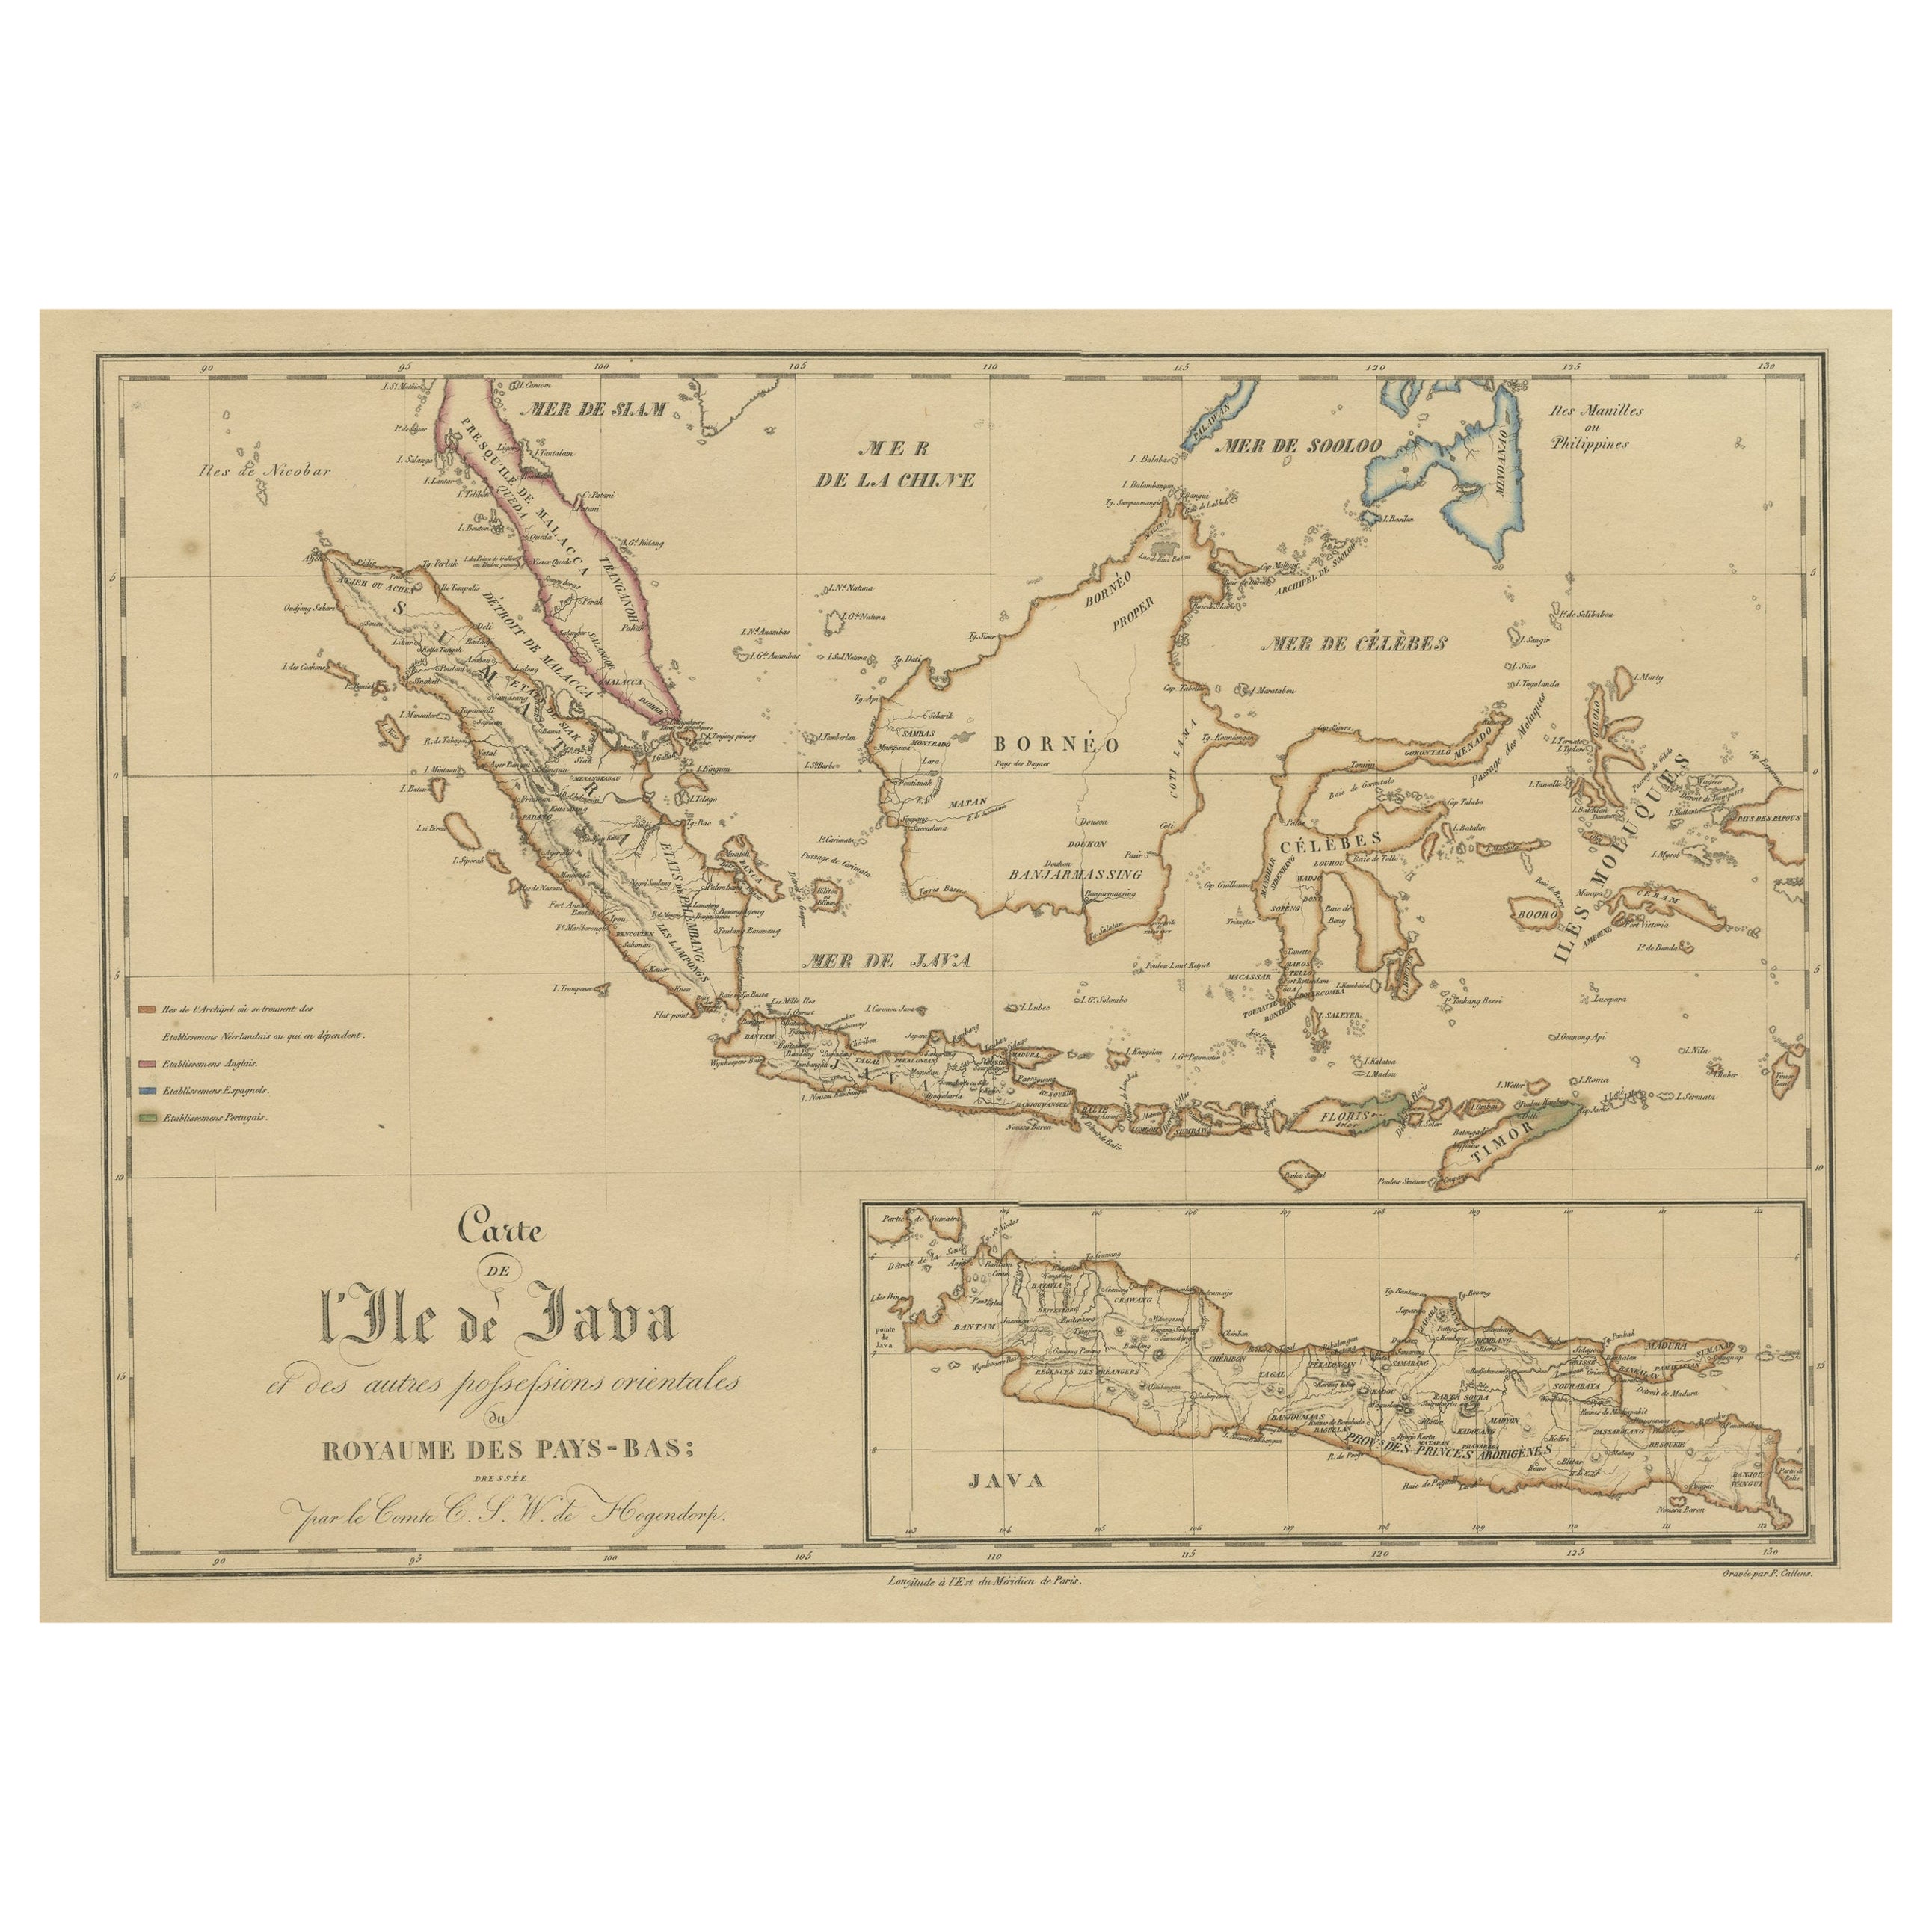 Antique Map of the East Indies, with inset map of Java, Indonesia